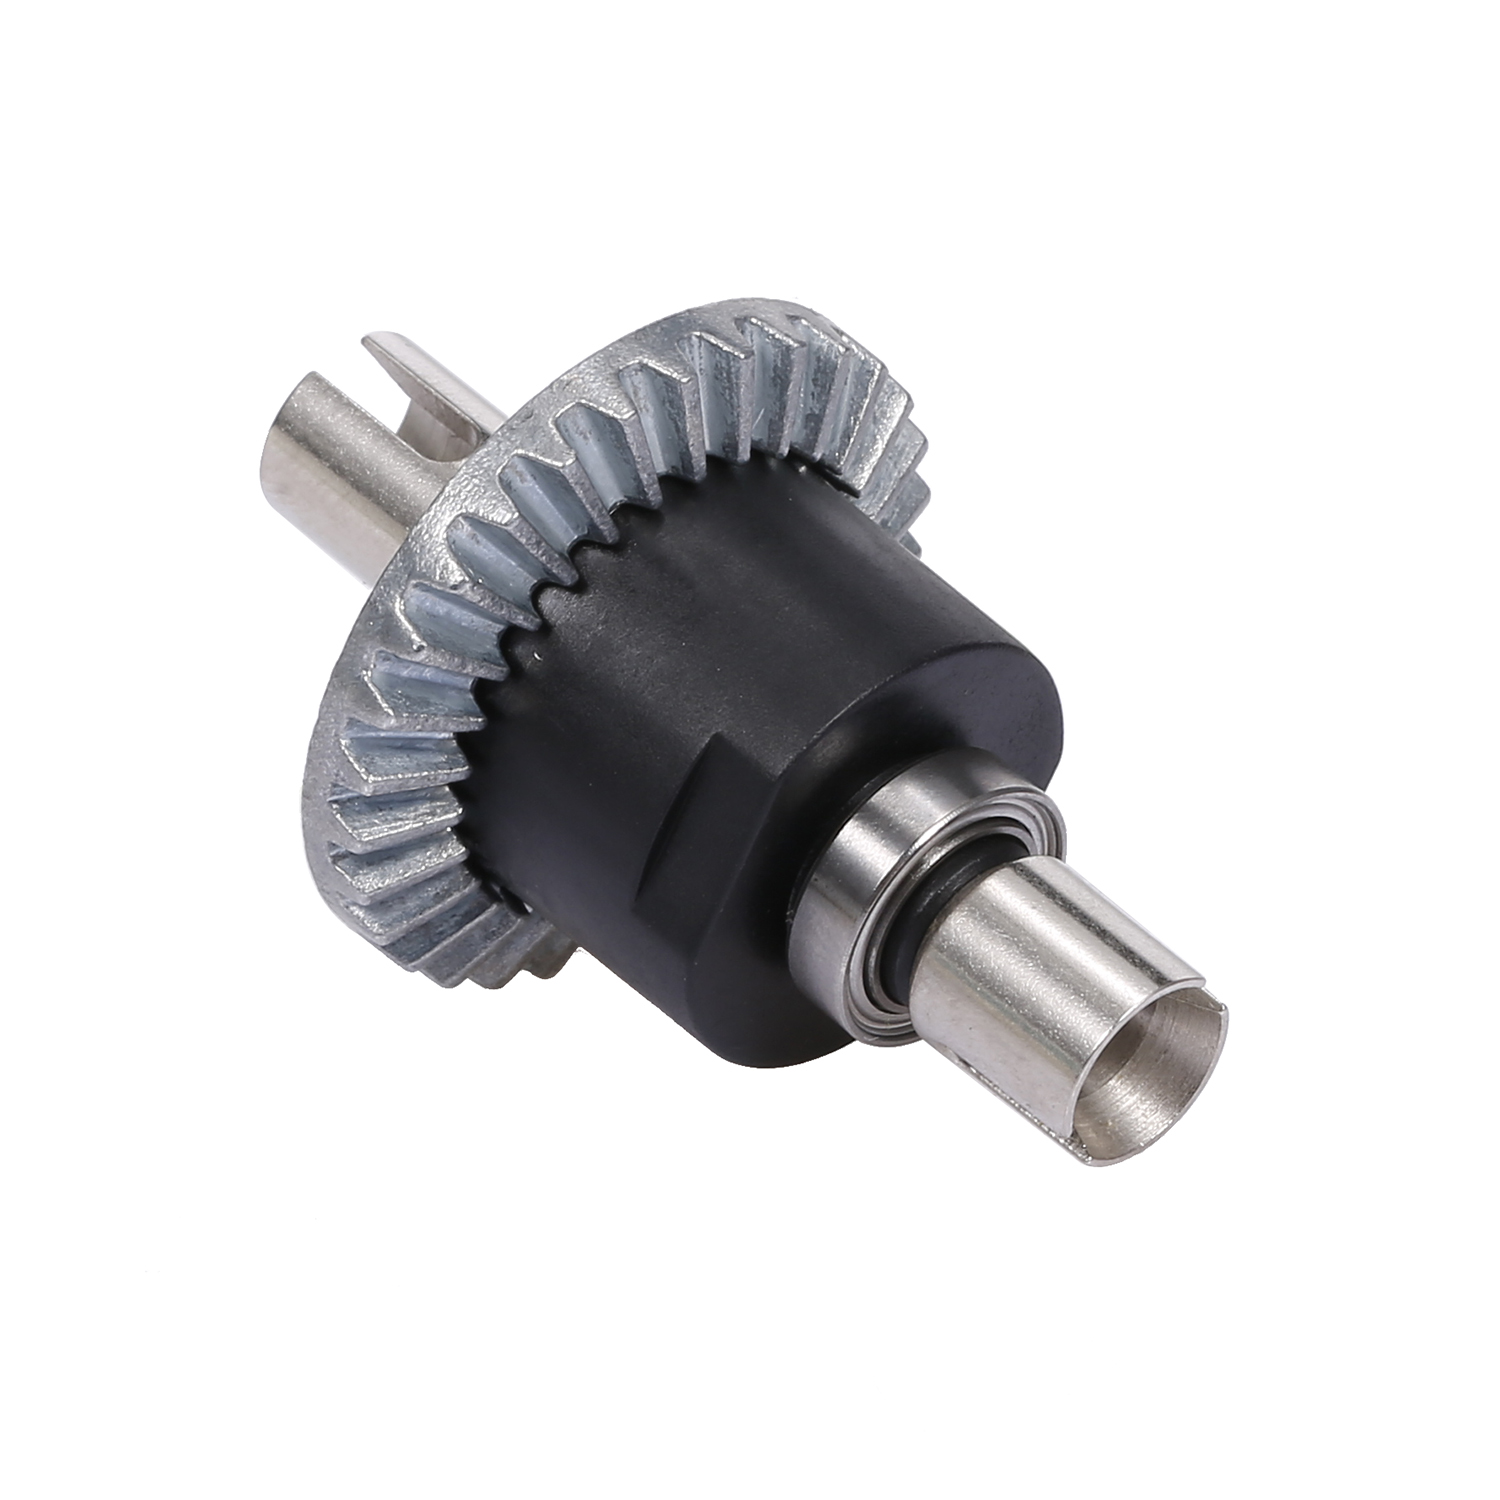 WLtoys Metal Differential for Wltoys XK 144001 RC Car Replacement Part Differential Gear for Wltoys XK 144001 114 2.4GHz RC - image 2 of 7